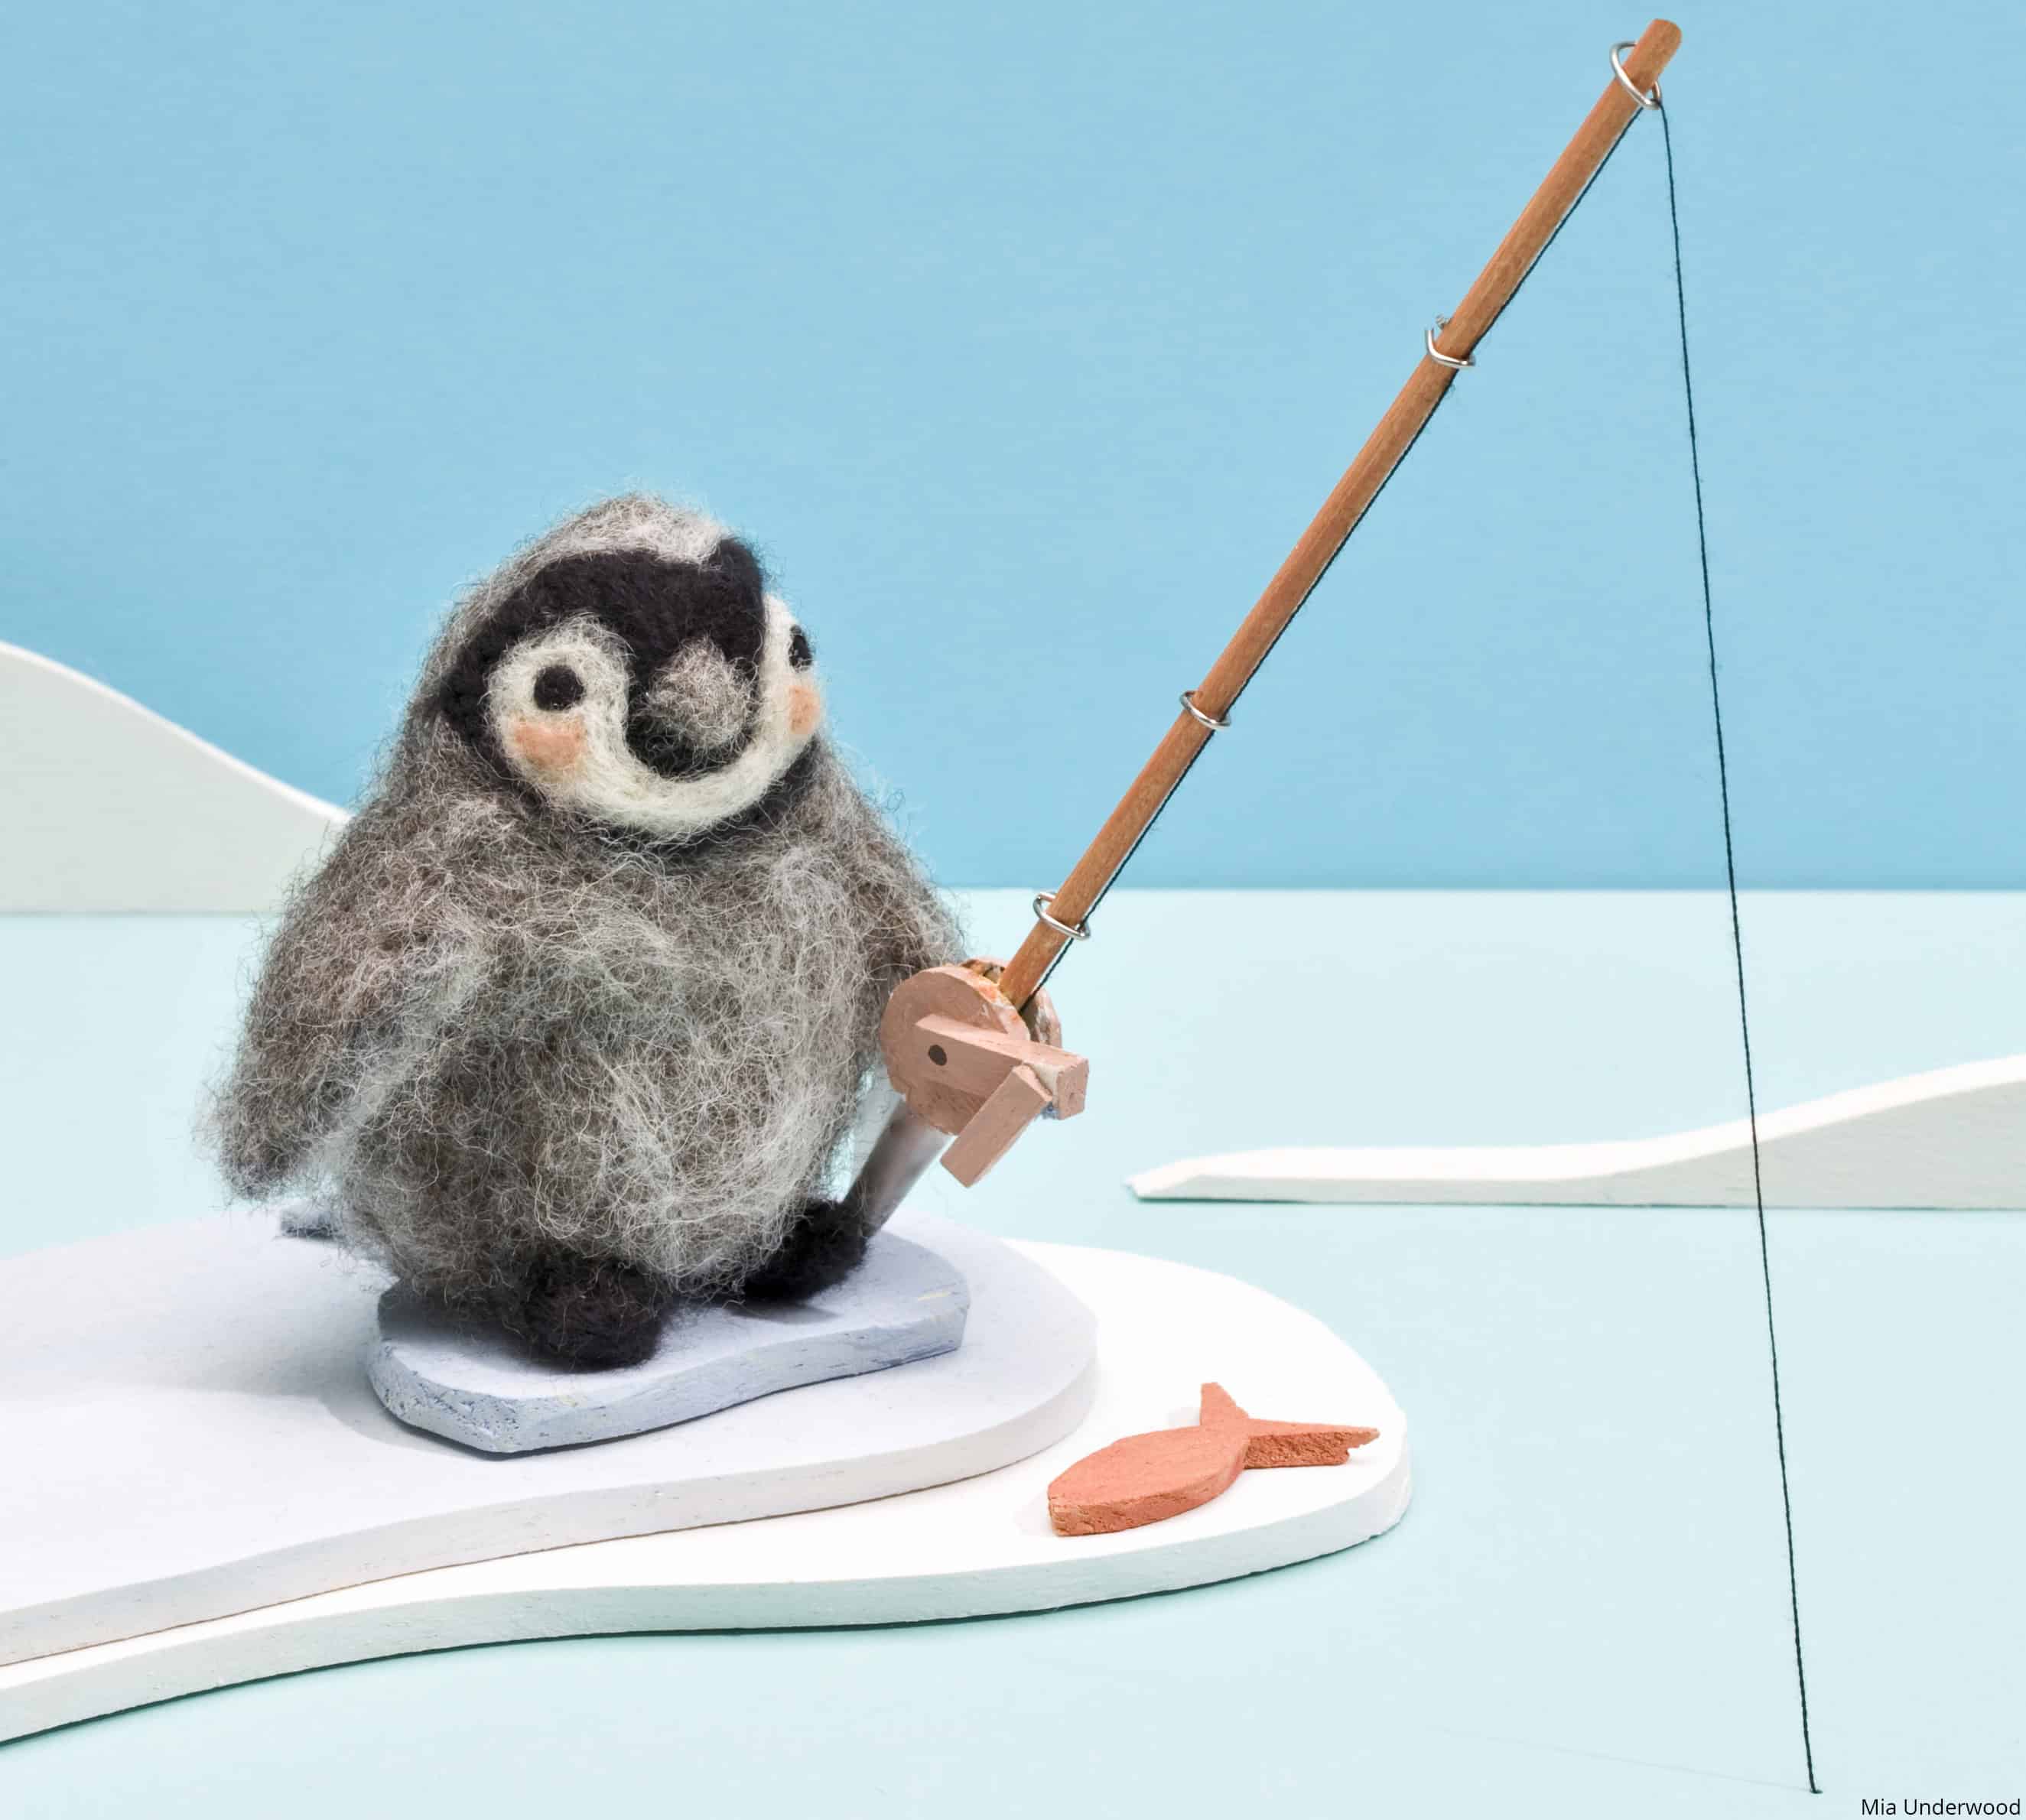 Needle felted penguin 3D figure in an icy scene holding a fishing rod